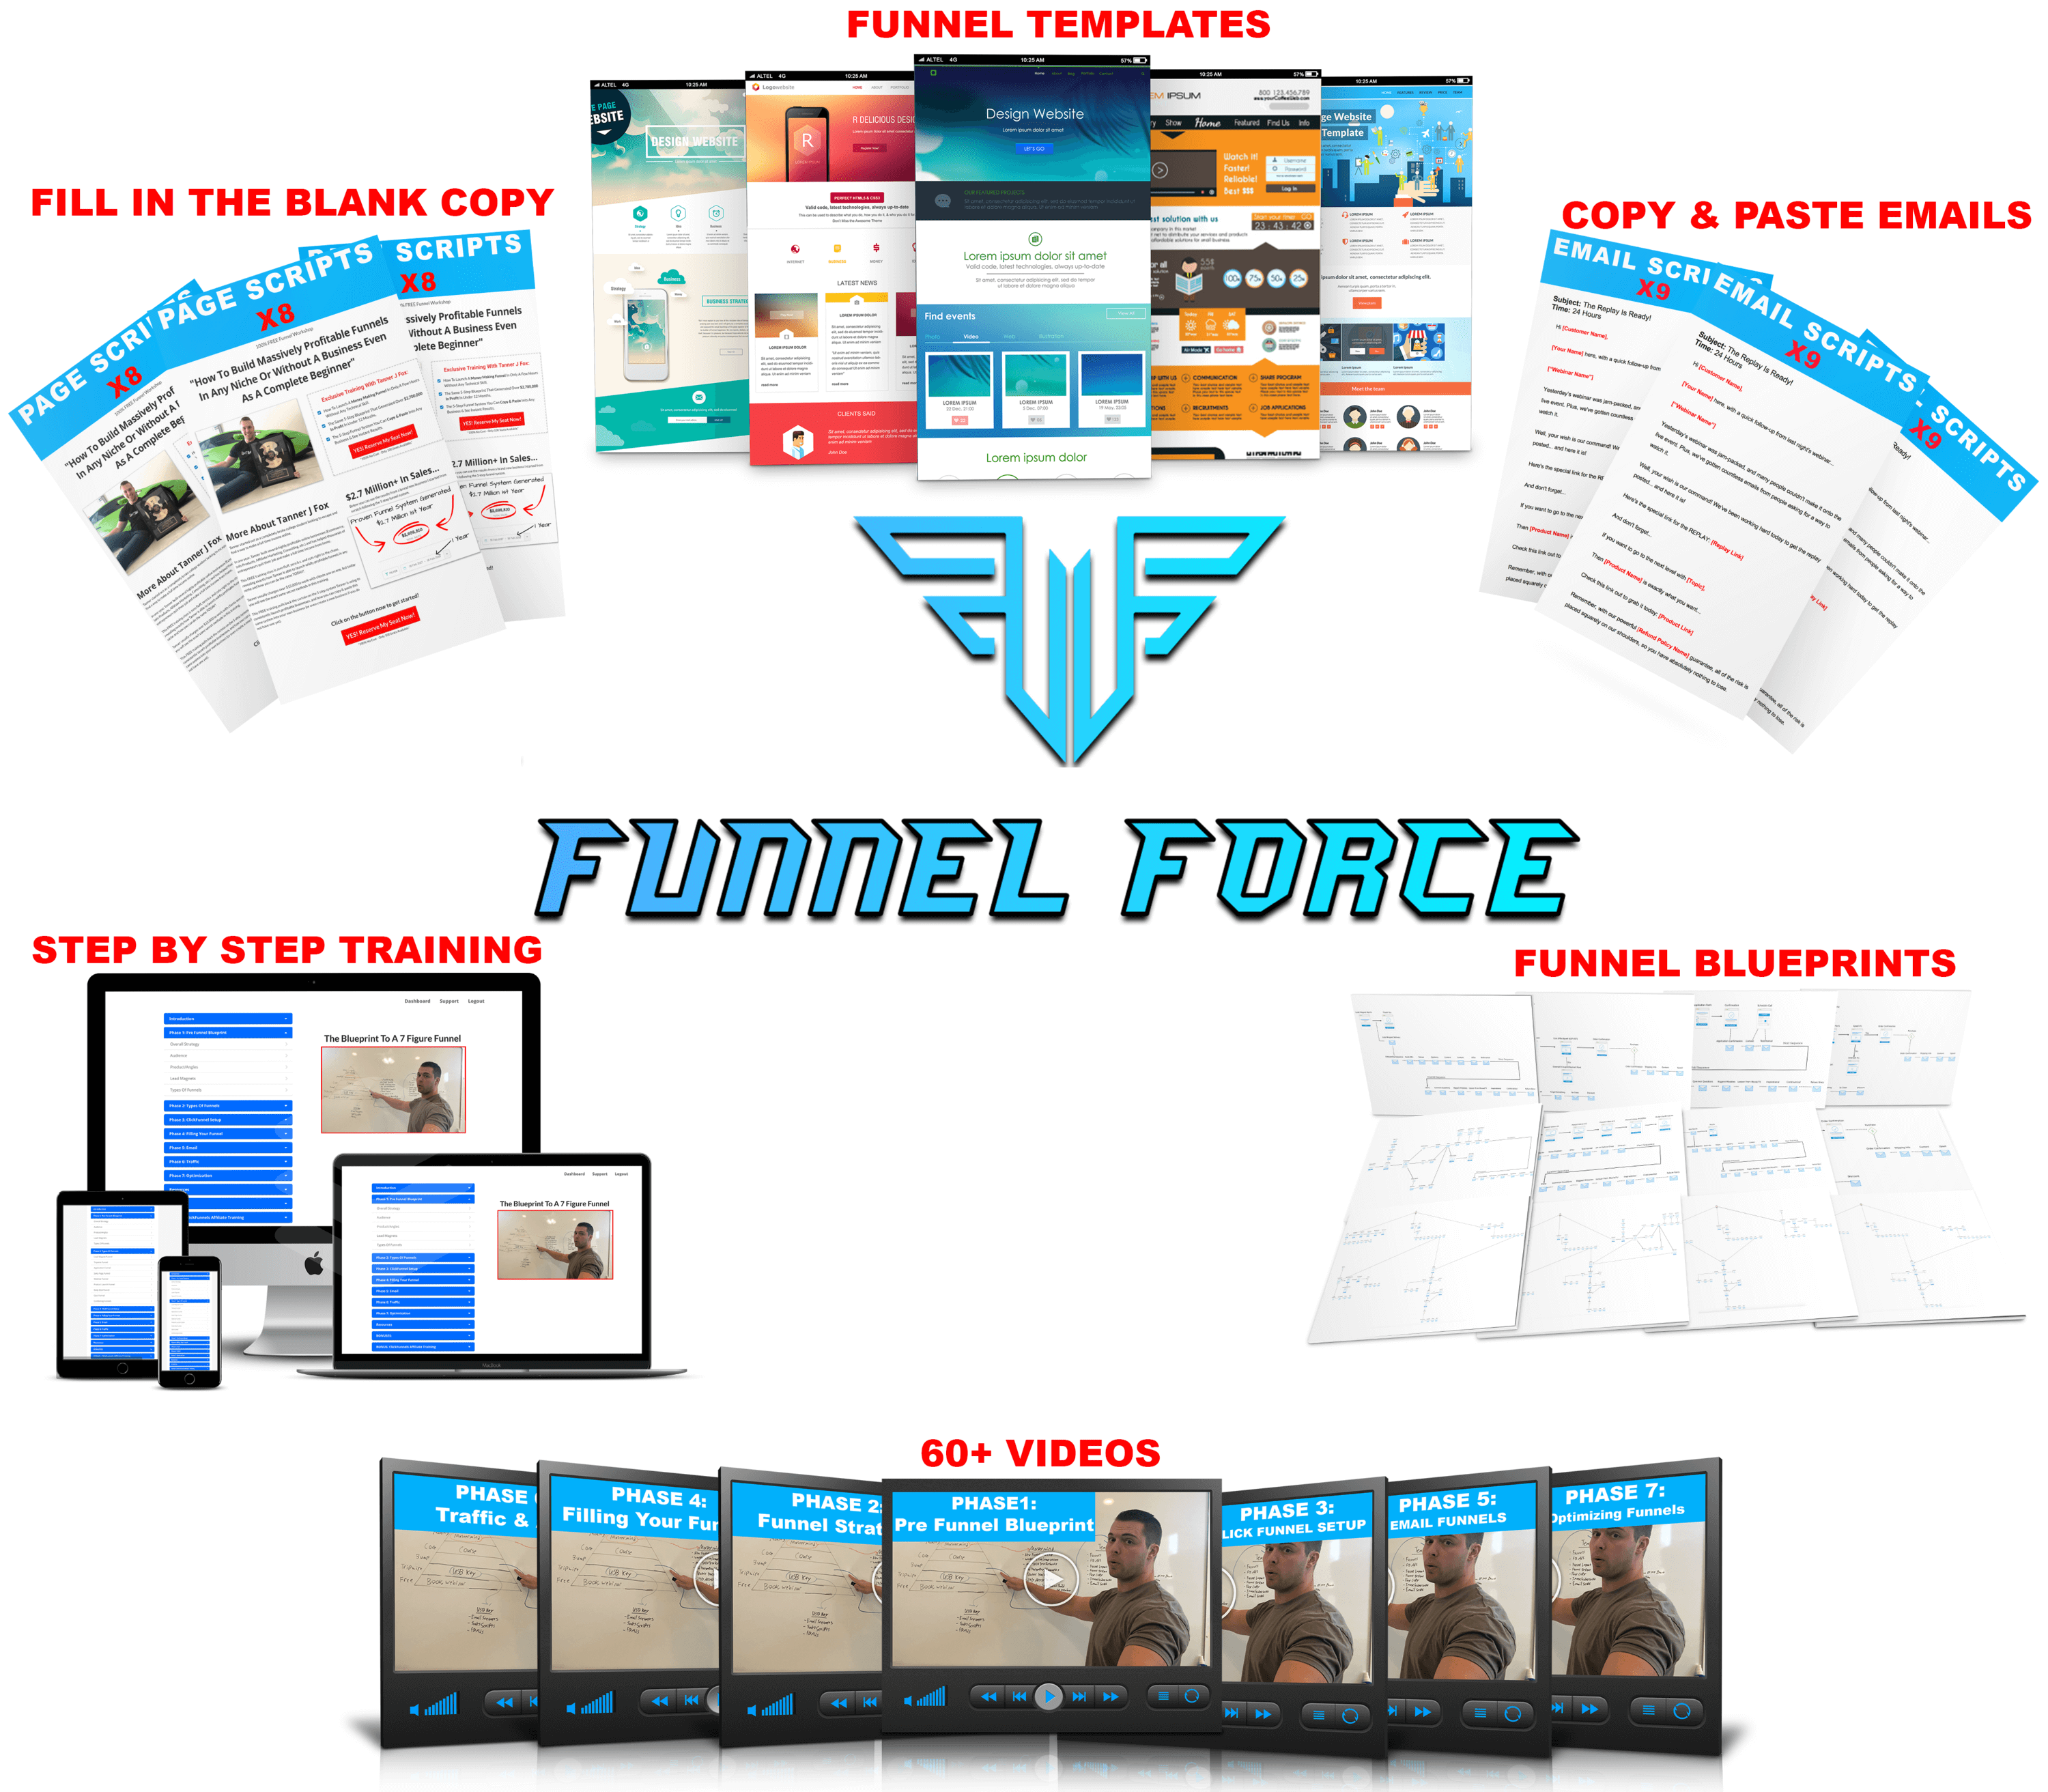 Tanner J. Fox - The Funnel Force